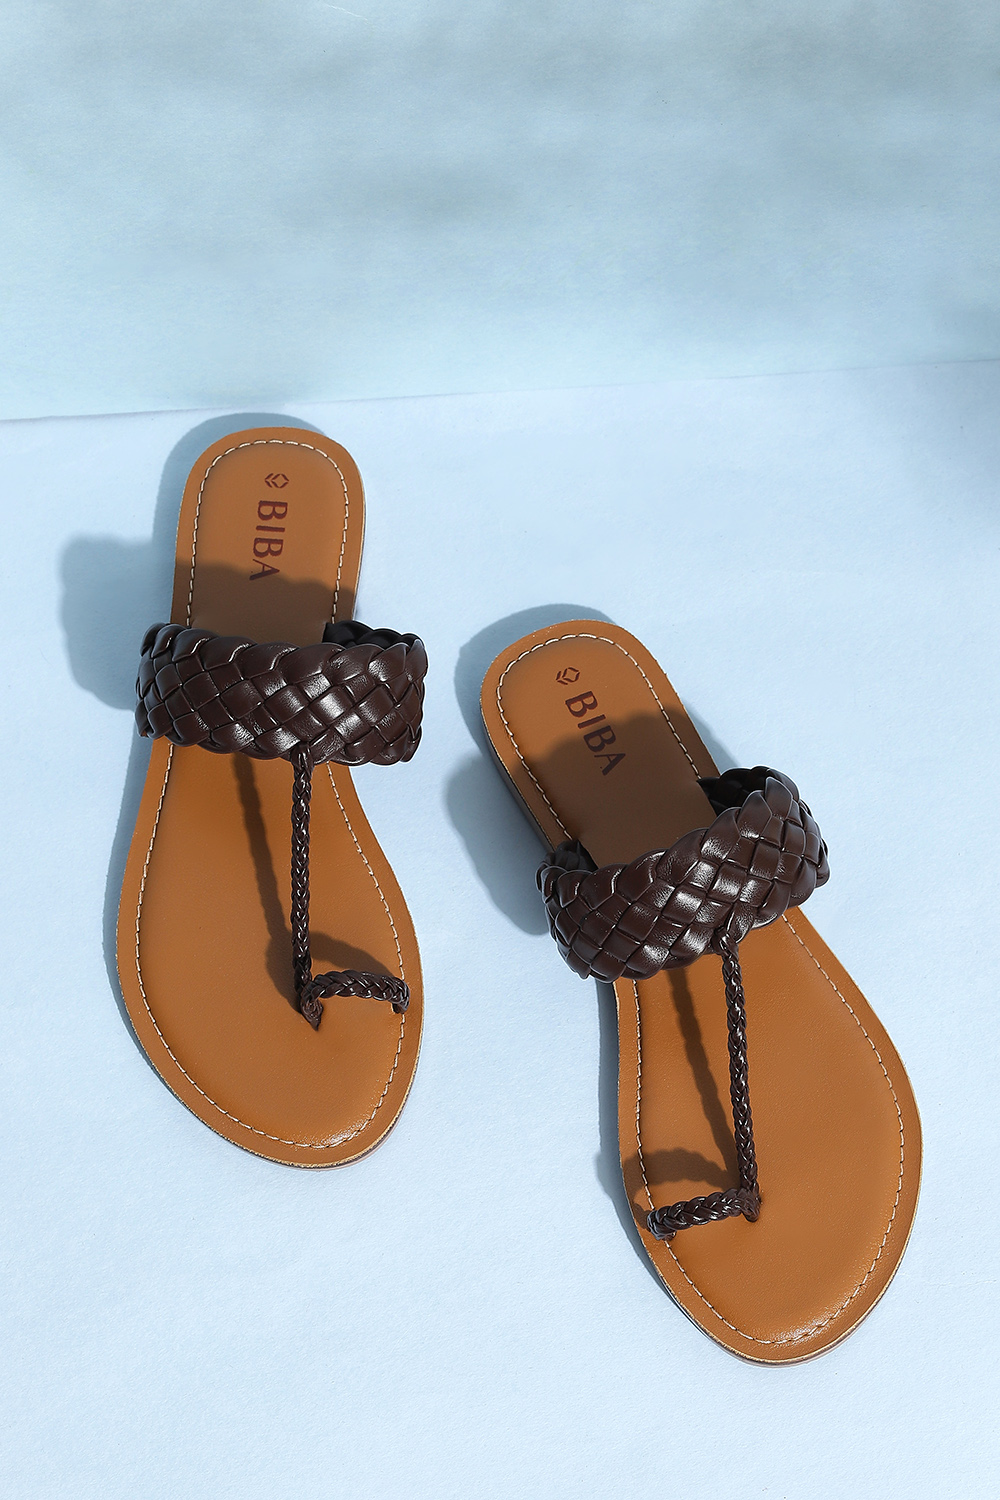 Women's Ring Toe Flat Slippers Tower Buckle Decoration Fashion Casual  Leather Sandals Open Toe Comfortable Shoes Yoga Sandals for Women 